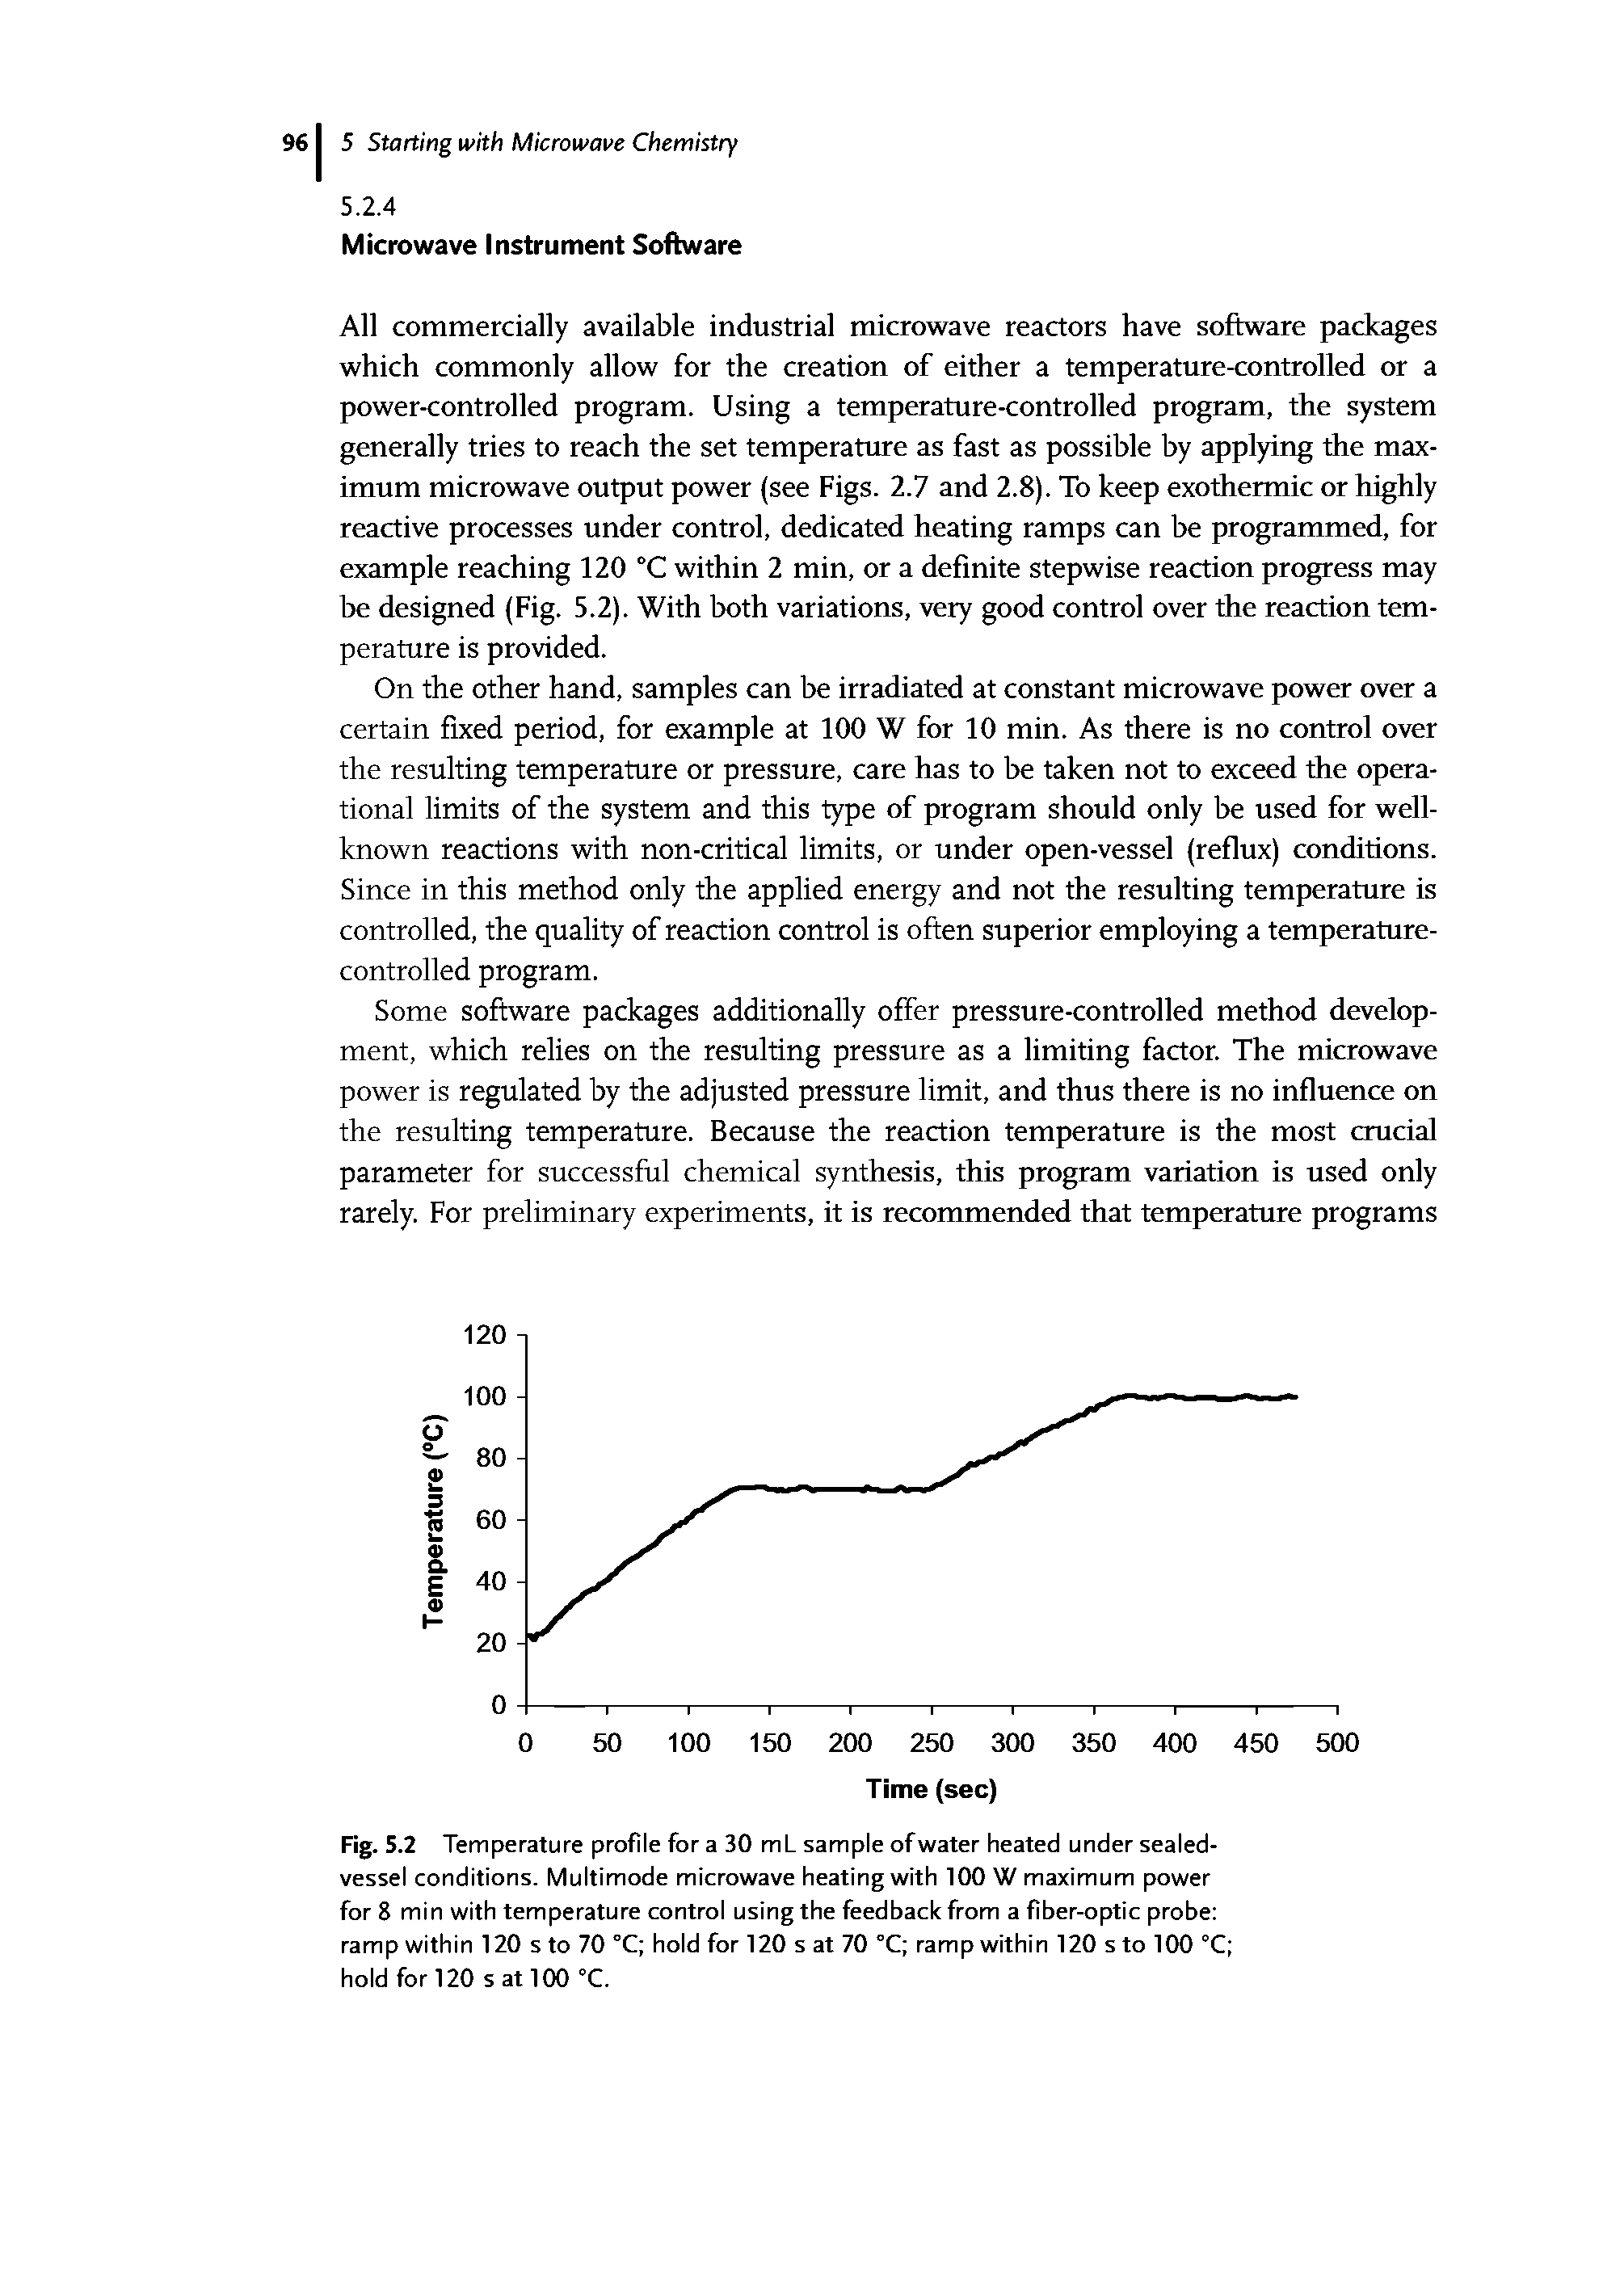 Fig. 5.2 Temperature profile for a 30 ml sample ofwater heated under sealed-vessel conditions. Multimode microwave heating with 100 W maximum power for 8 min with temperature control using the feedback from a f ber-optic probe ramp within 120 s to 70 °C hold for 120 s at 70 °C ramp within 120 s to 100 °C hold for 120 s at 100 °C.